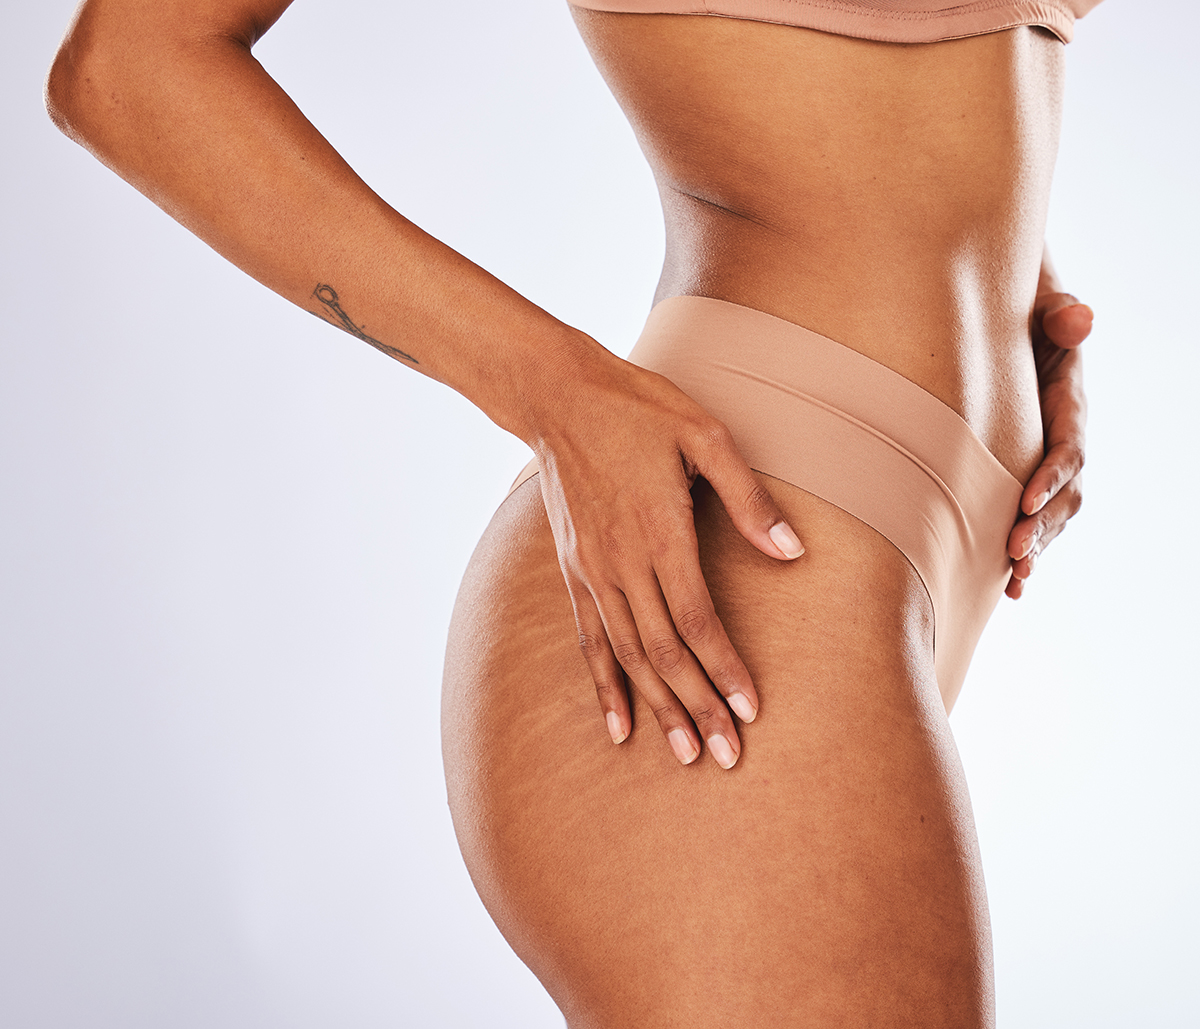 Patients can control stretch marks with Fraxel laser therapy